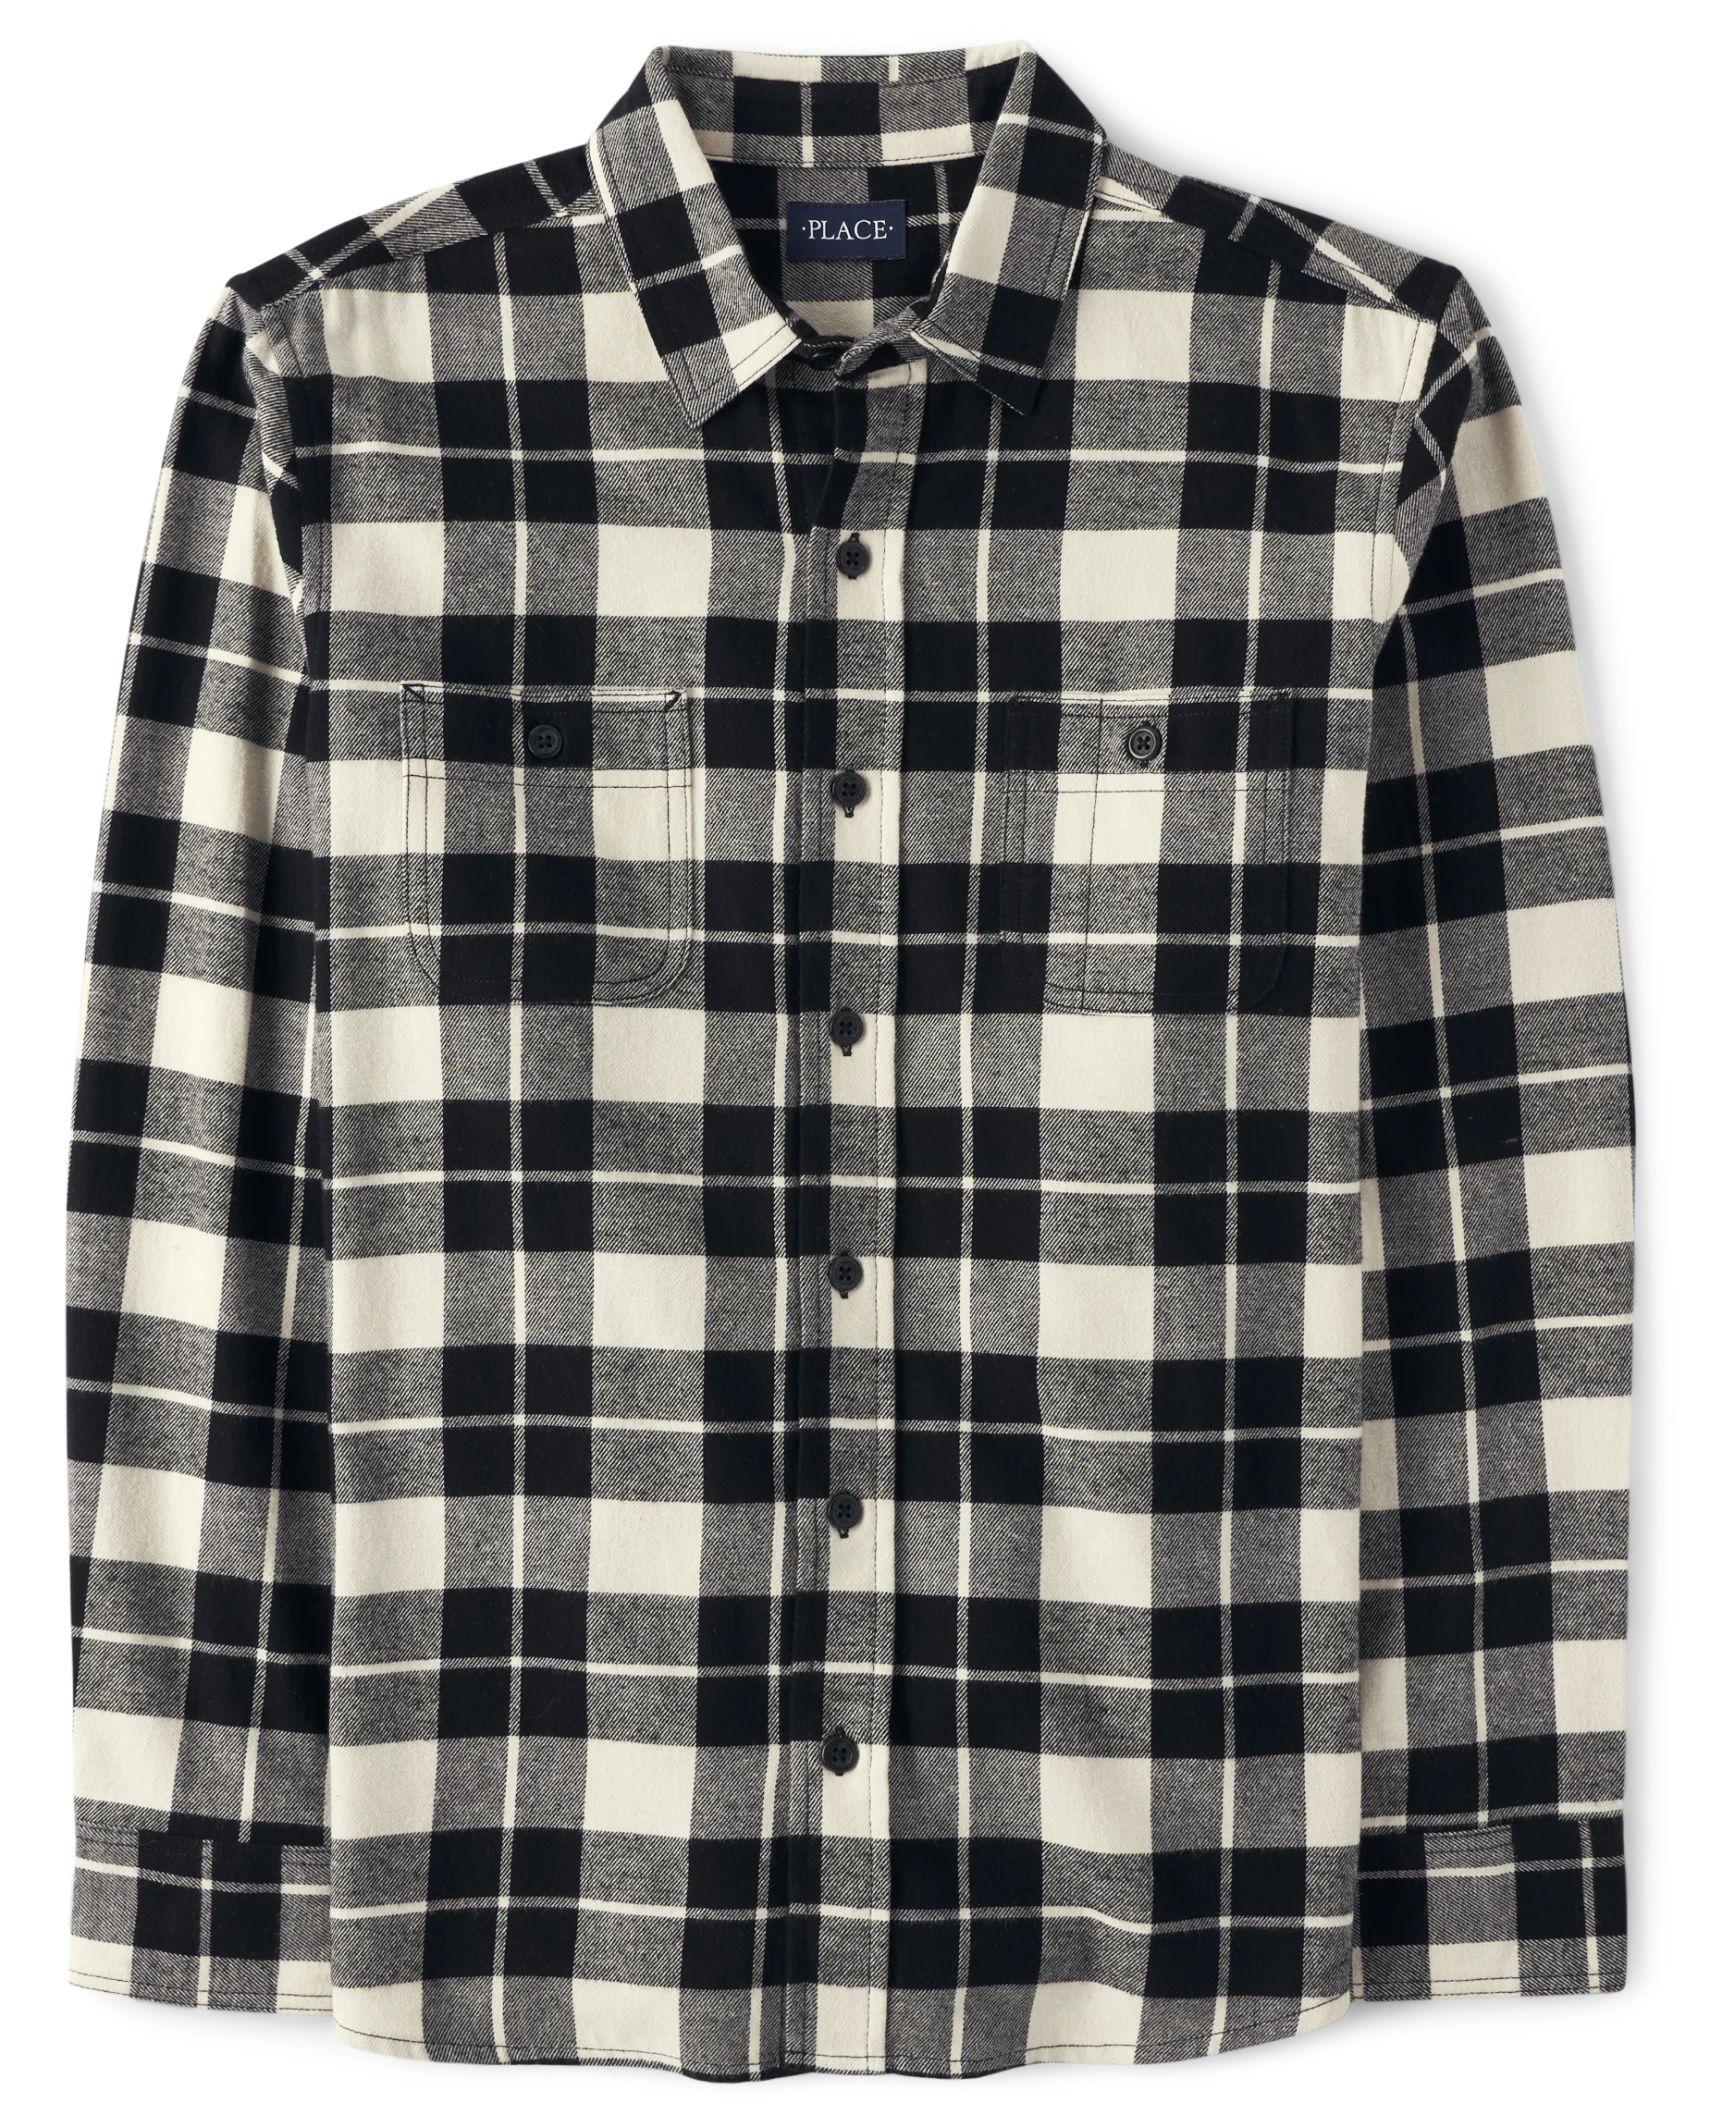 Mens Matching Family Plaid Flannel Button Up Shirt - hay stack | The Children's Place